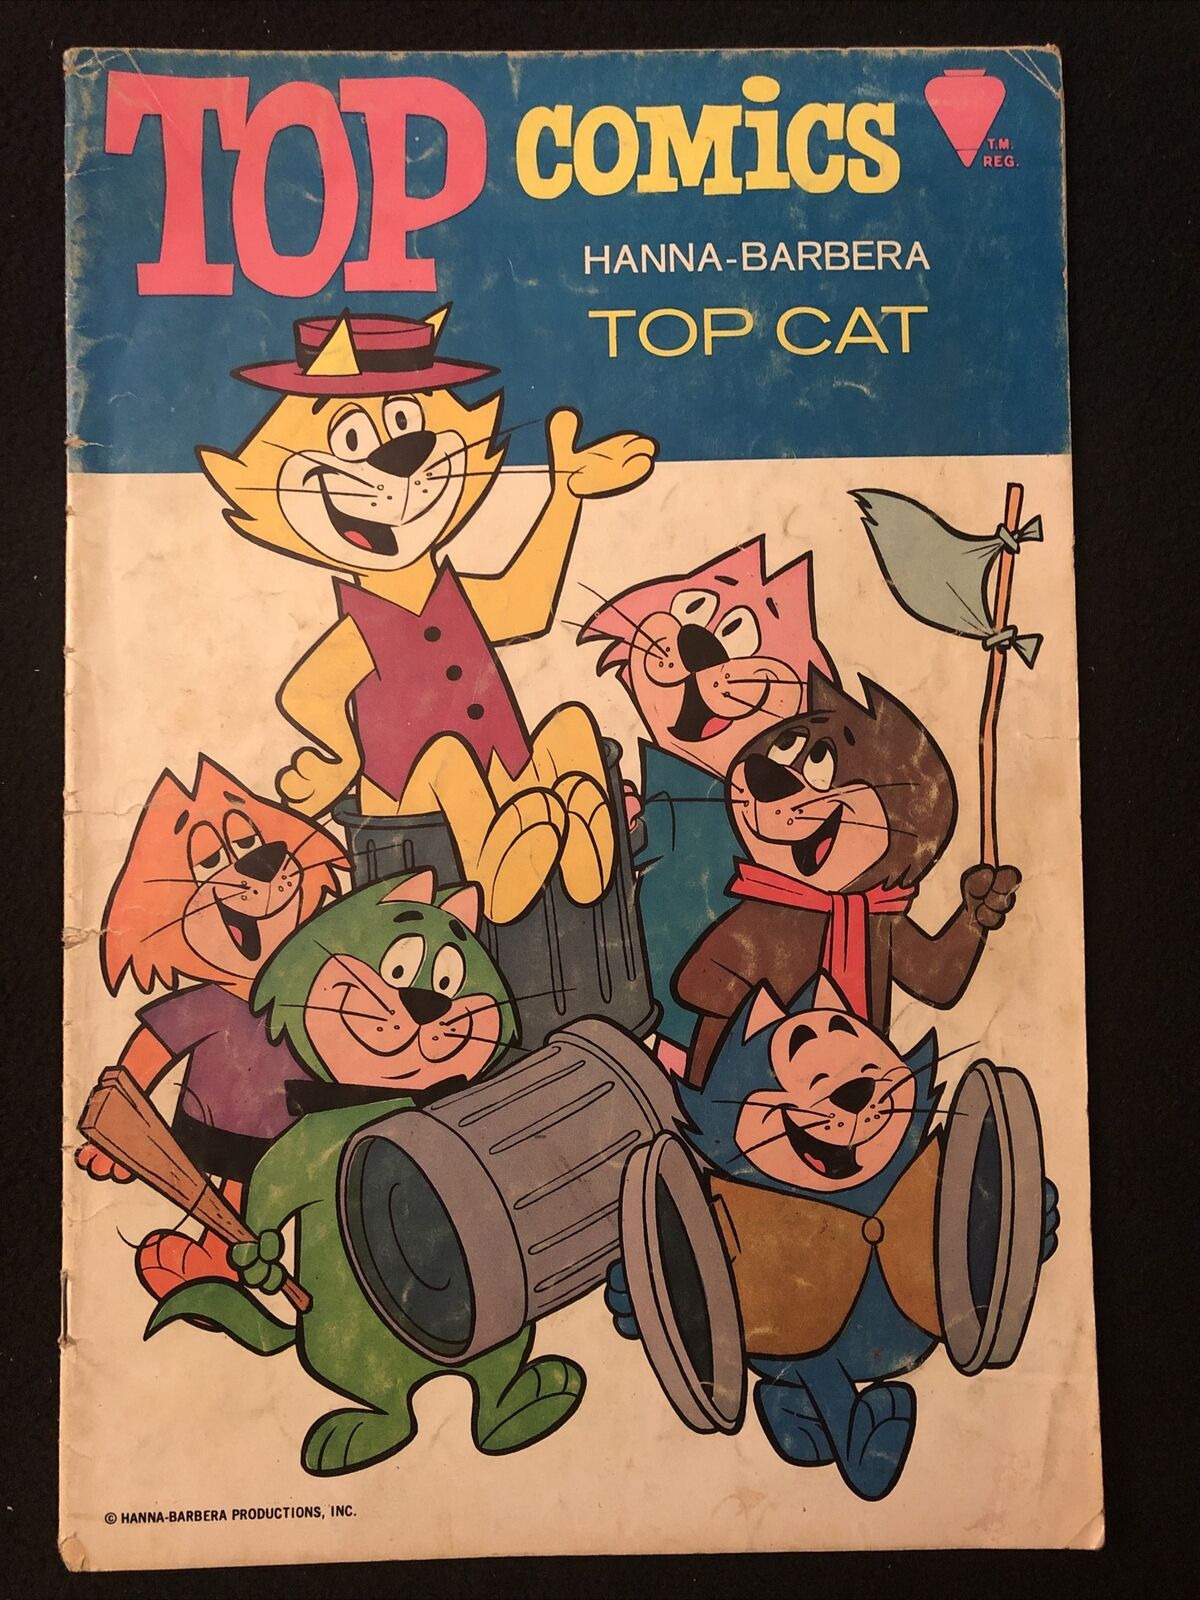 TOP COMICS TOP CAT 1 2.5 GOLD KEY 1960 MISSING CENTERFOLD 2 PAGES UV